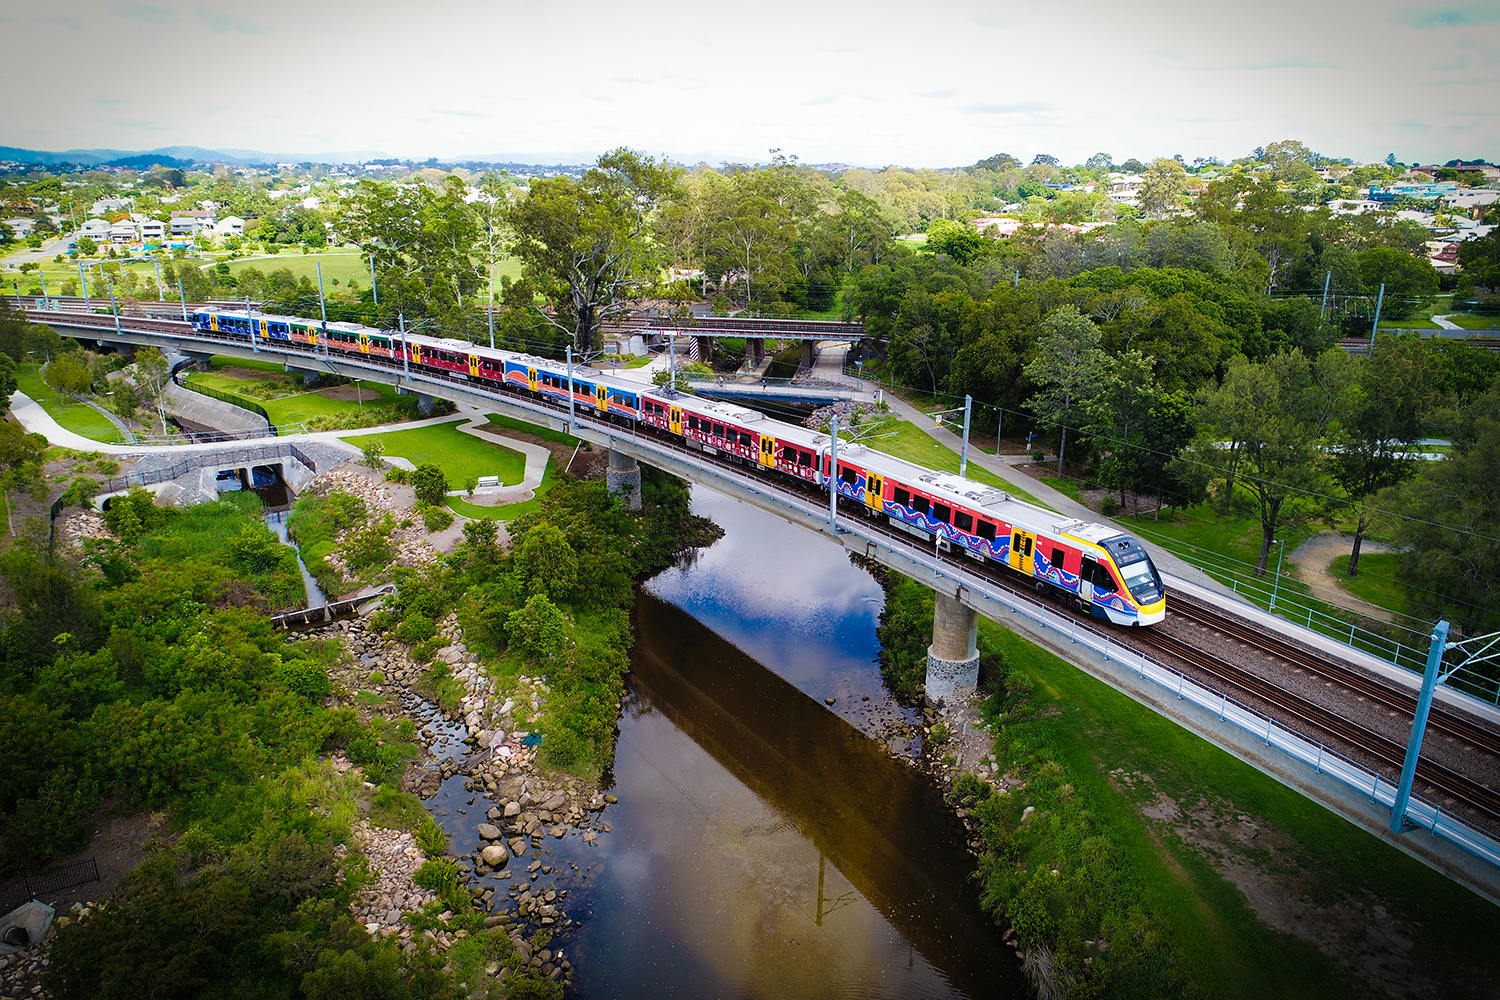 A New Generation Rollingstock (NGR) train for Queensland